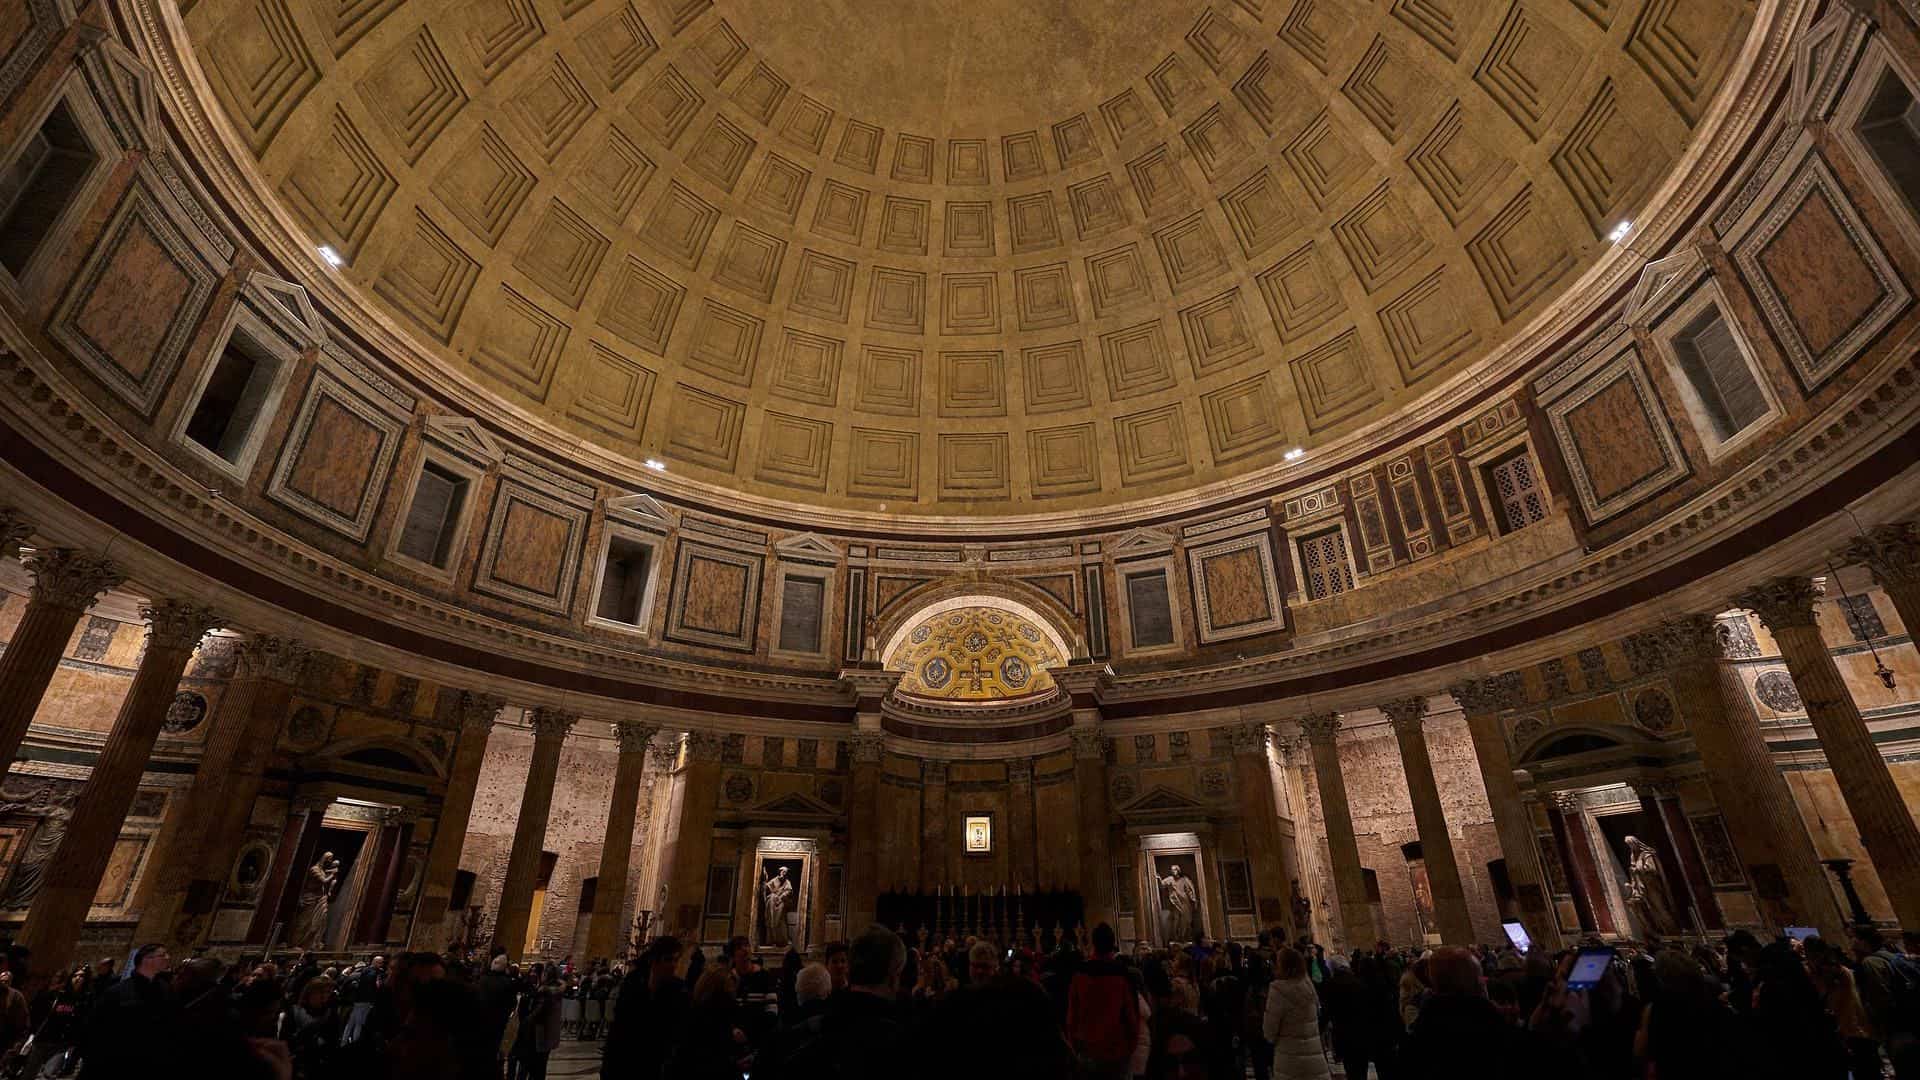 Visitors inside the Pantheon in Rome